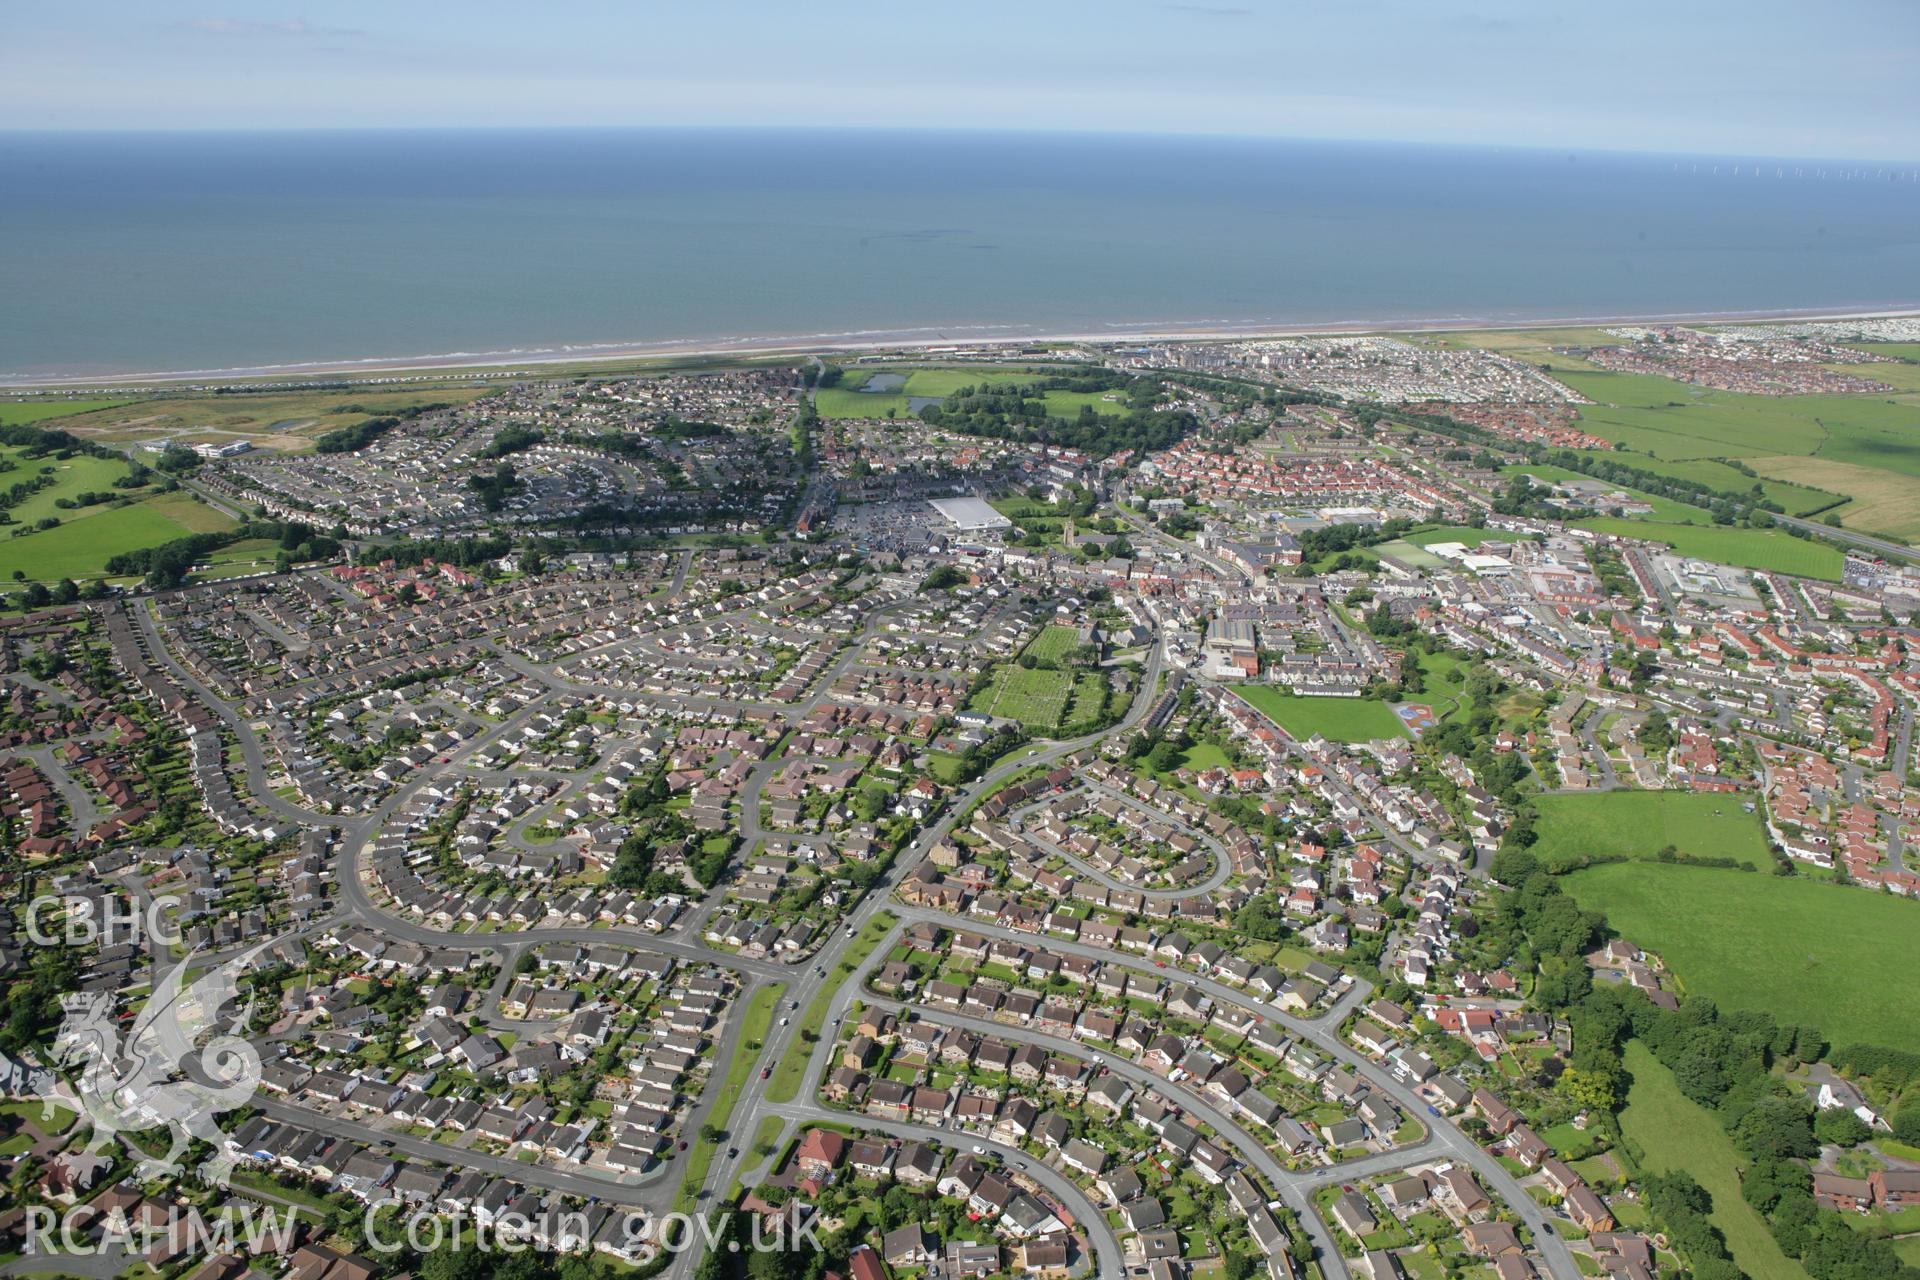 RCAHMW colour oblique aerial photograph of Abergele. Taken on 31 July 2007 by Toby Driver